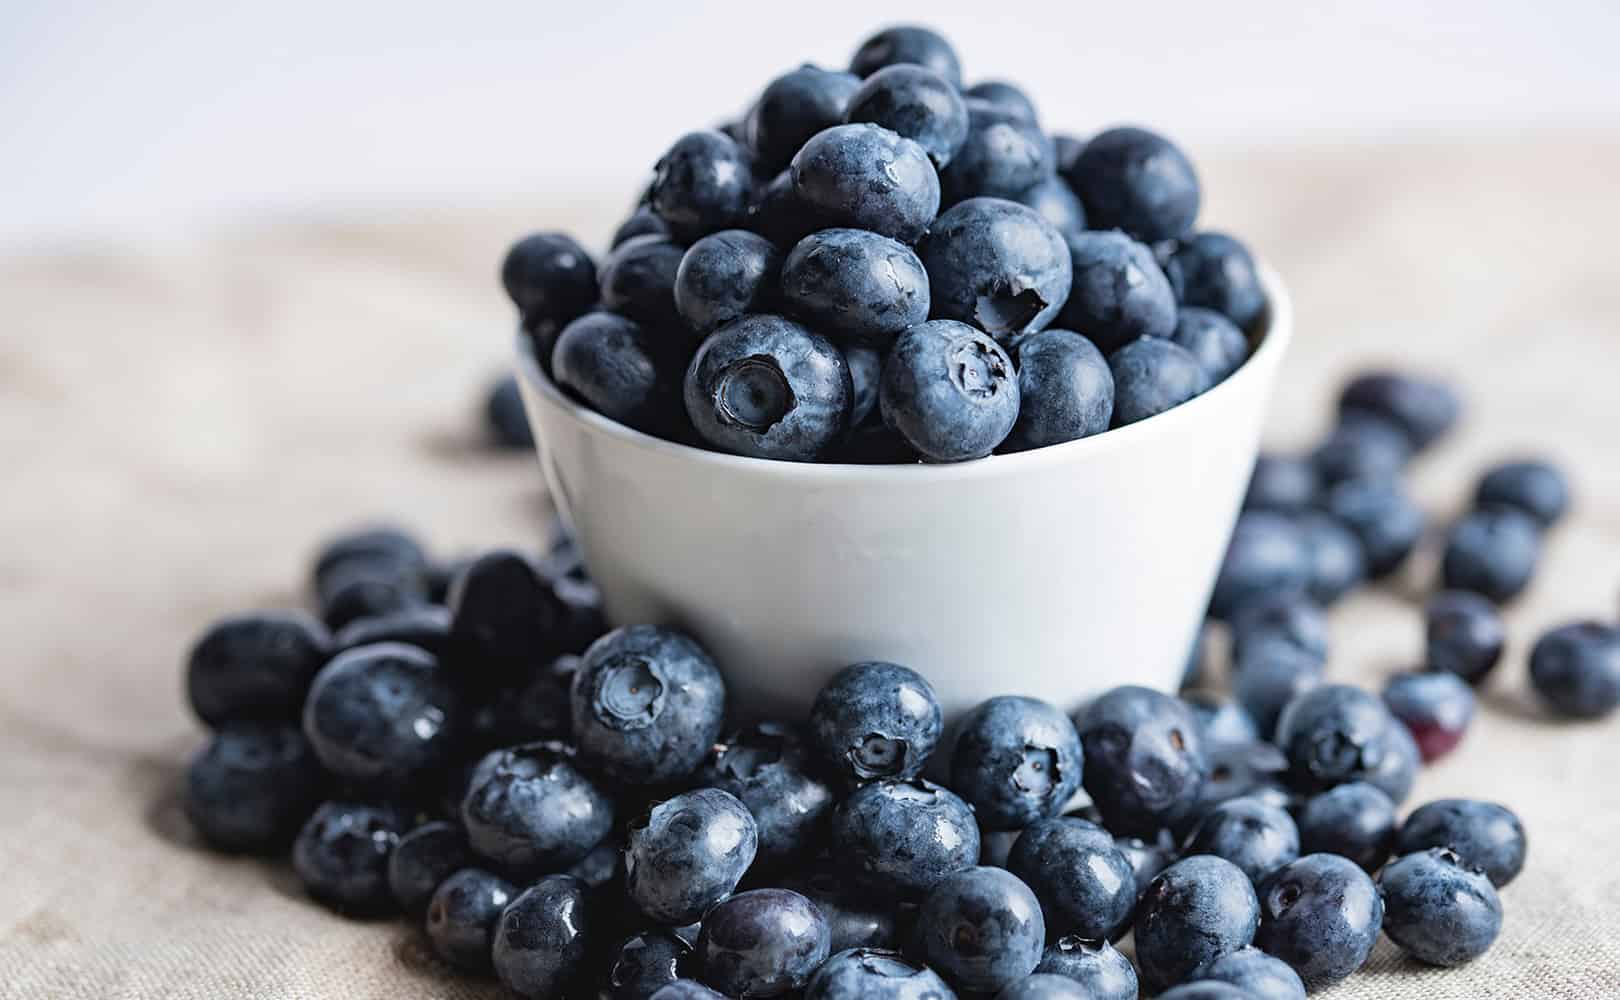 Blueberries in a small white bowl, surrounded by blueberries.